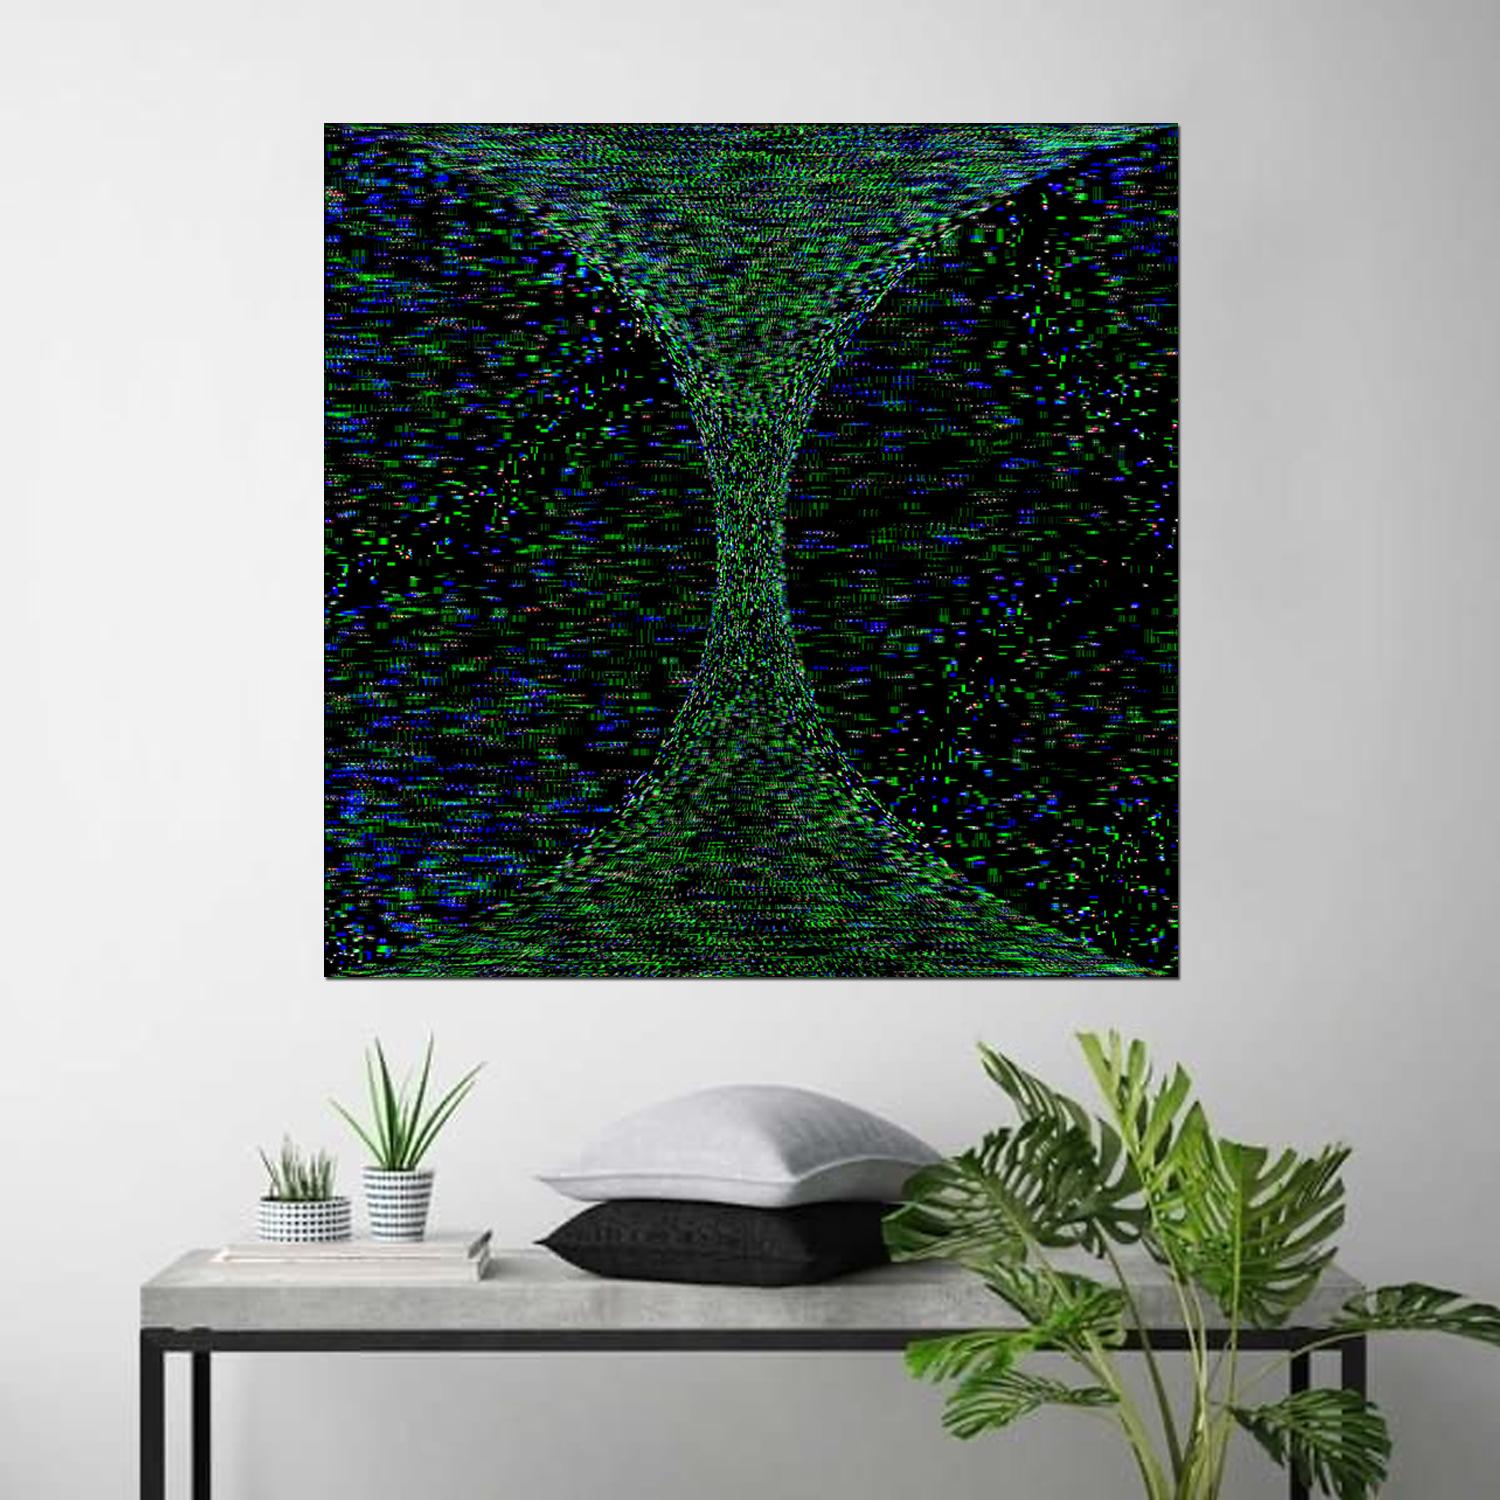 Noise #13 [Black, Blue, Green, 3D, Lenticular, New media, Galaxy, Semicircle] For Sale 2